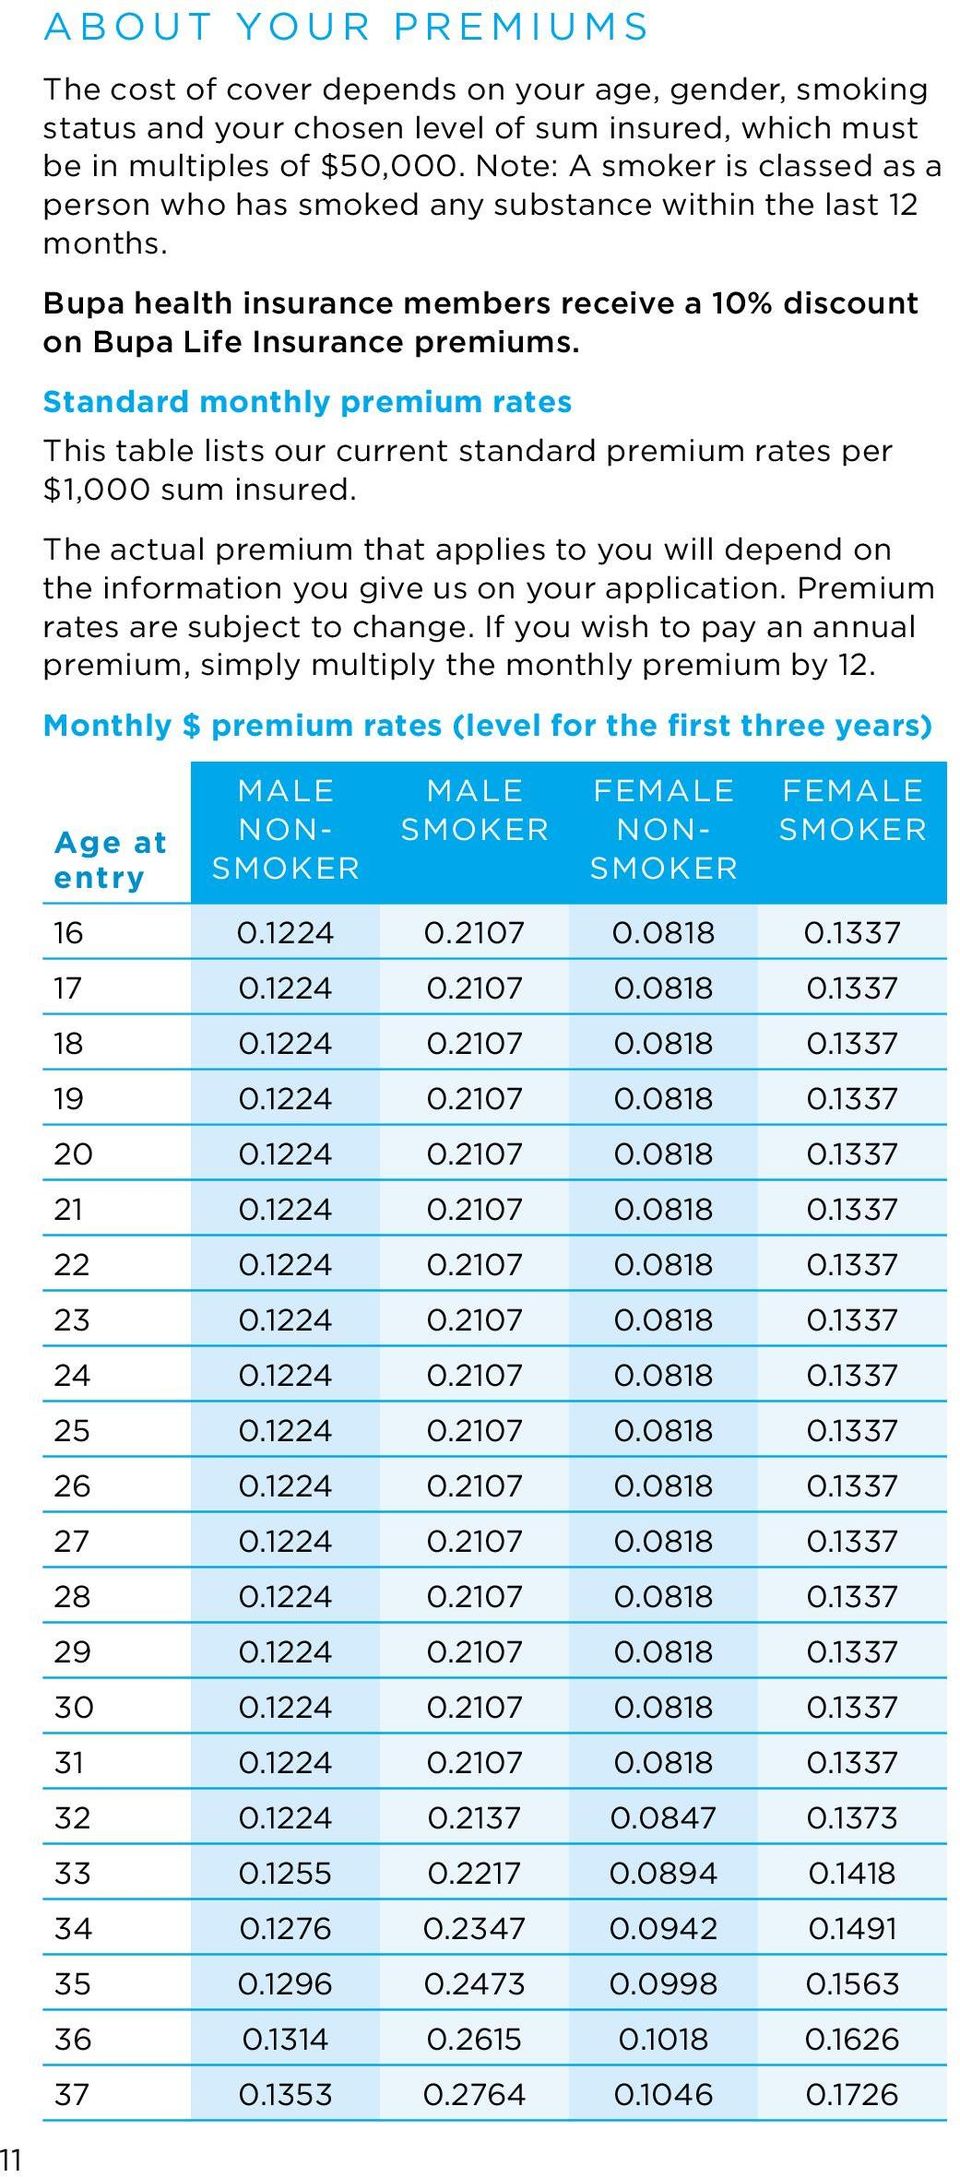 Standard monthly premium rates This table lists our current standard premium rates per $1,000 sum insured.